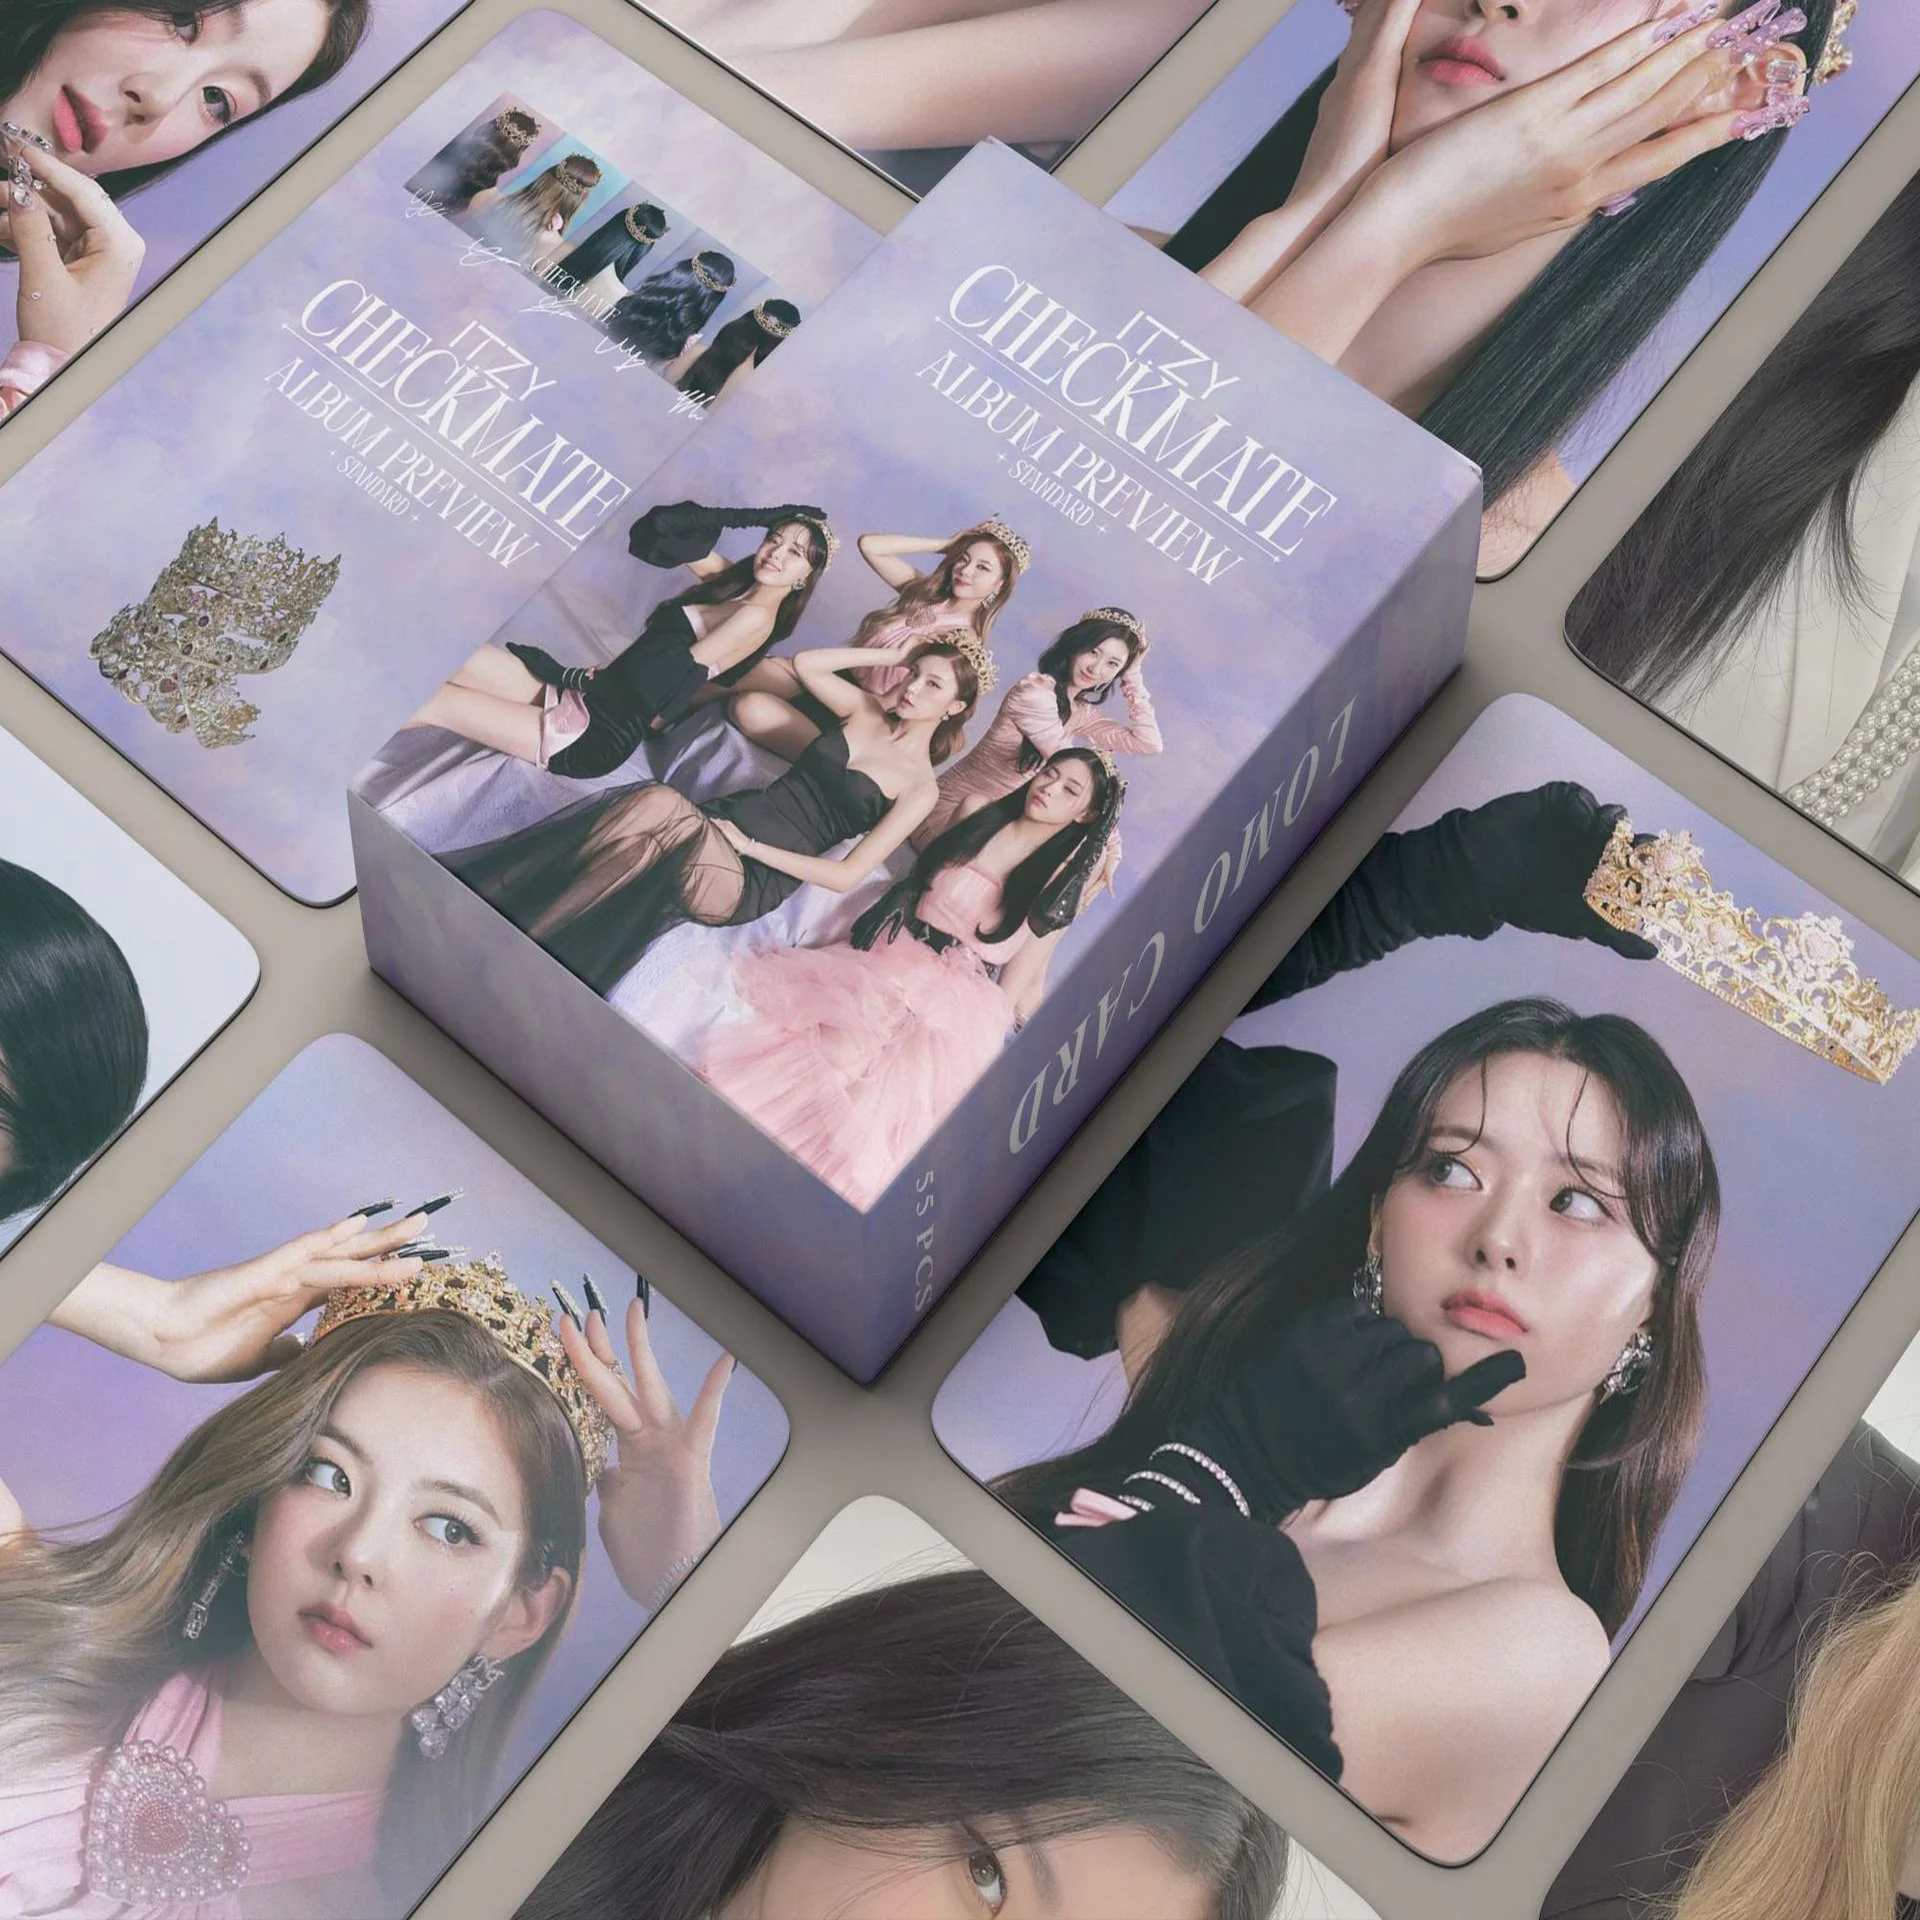 55pcs/set Kpop ITZY CHECKMATE BEST FRIENDS FOREVER Lomo Cards Greeting Season Photo album Cards Photocard Postcard Fashion 55pcs set kpop oh my girl lomo cards photo album real love postcard new album cards photo prints pictures fans gift